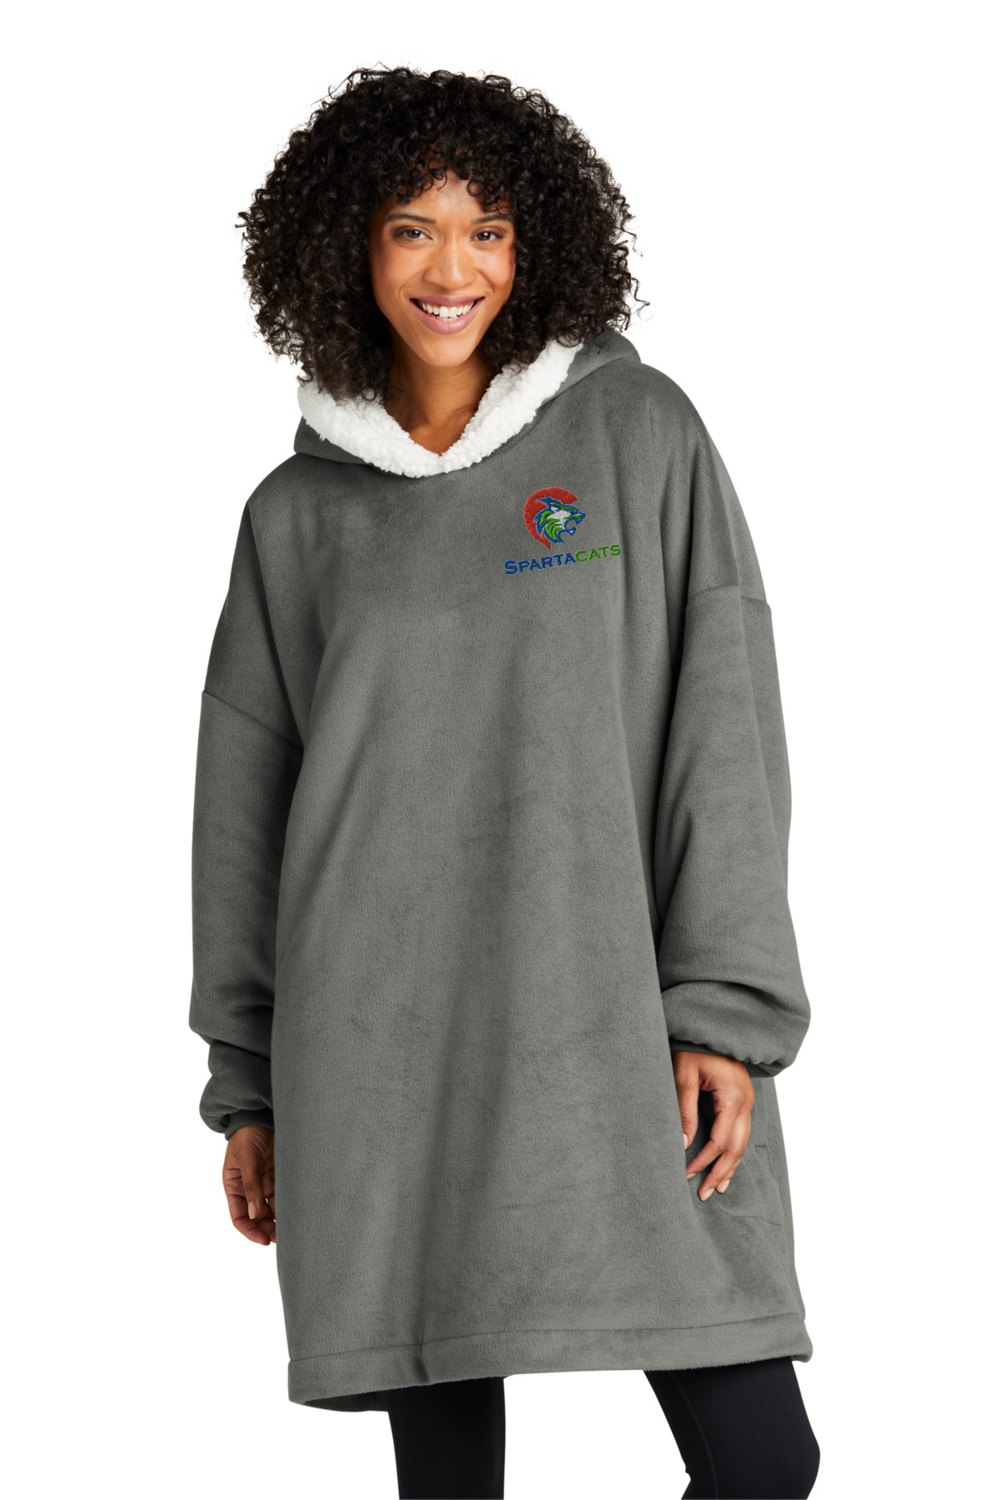 SpartaCats Mountain Lodge Wearable Blanket